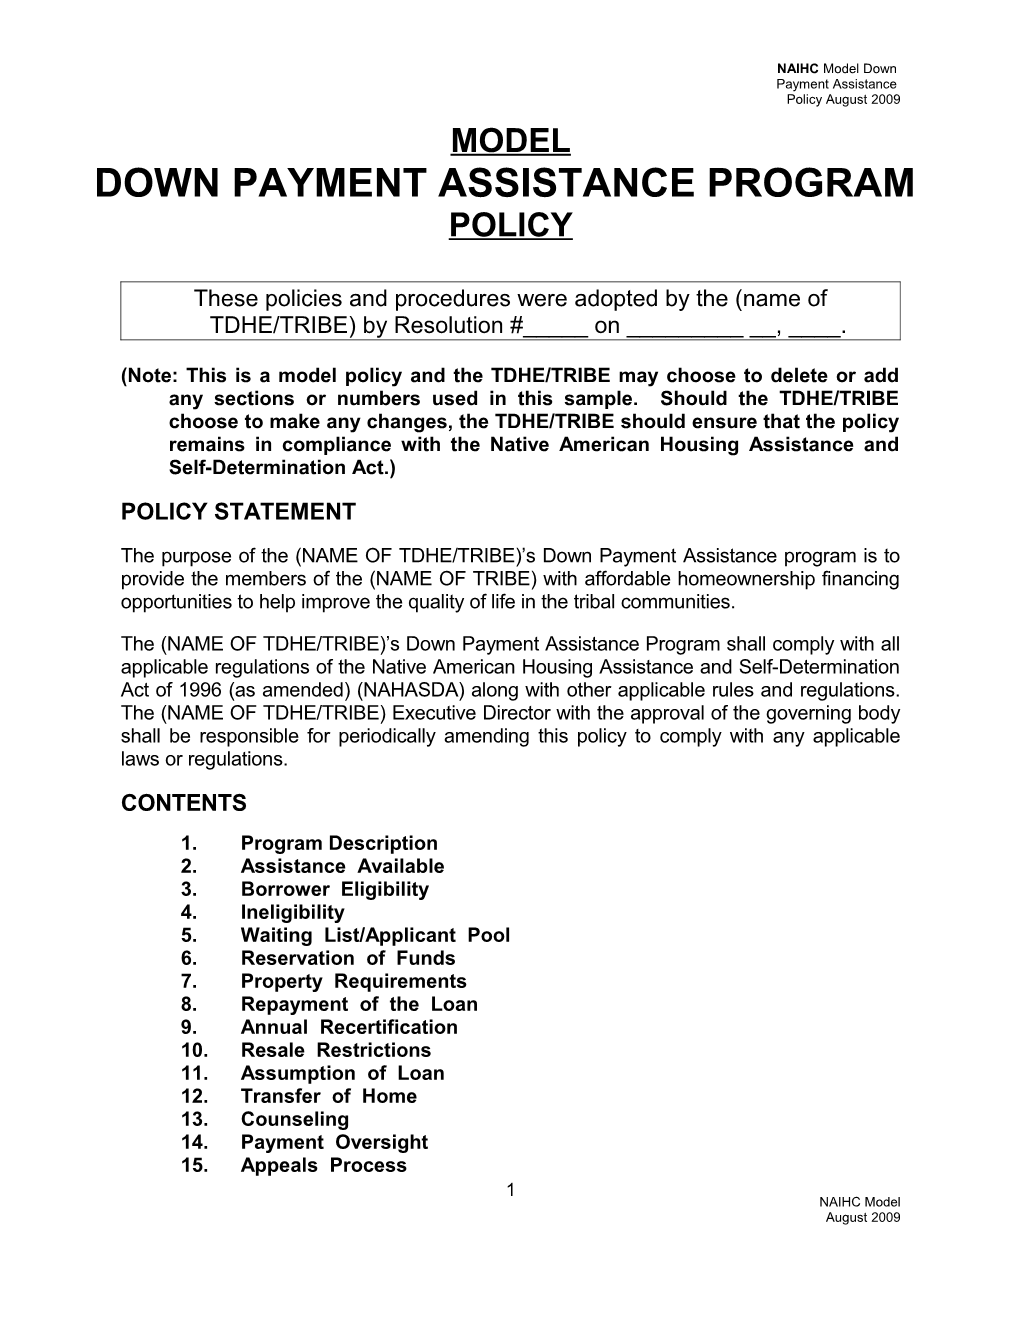 Down Payment Assistance Policy